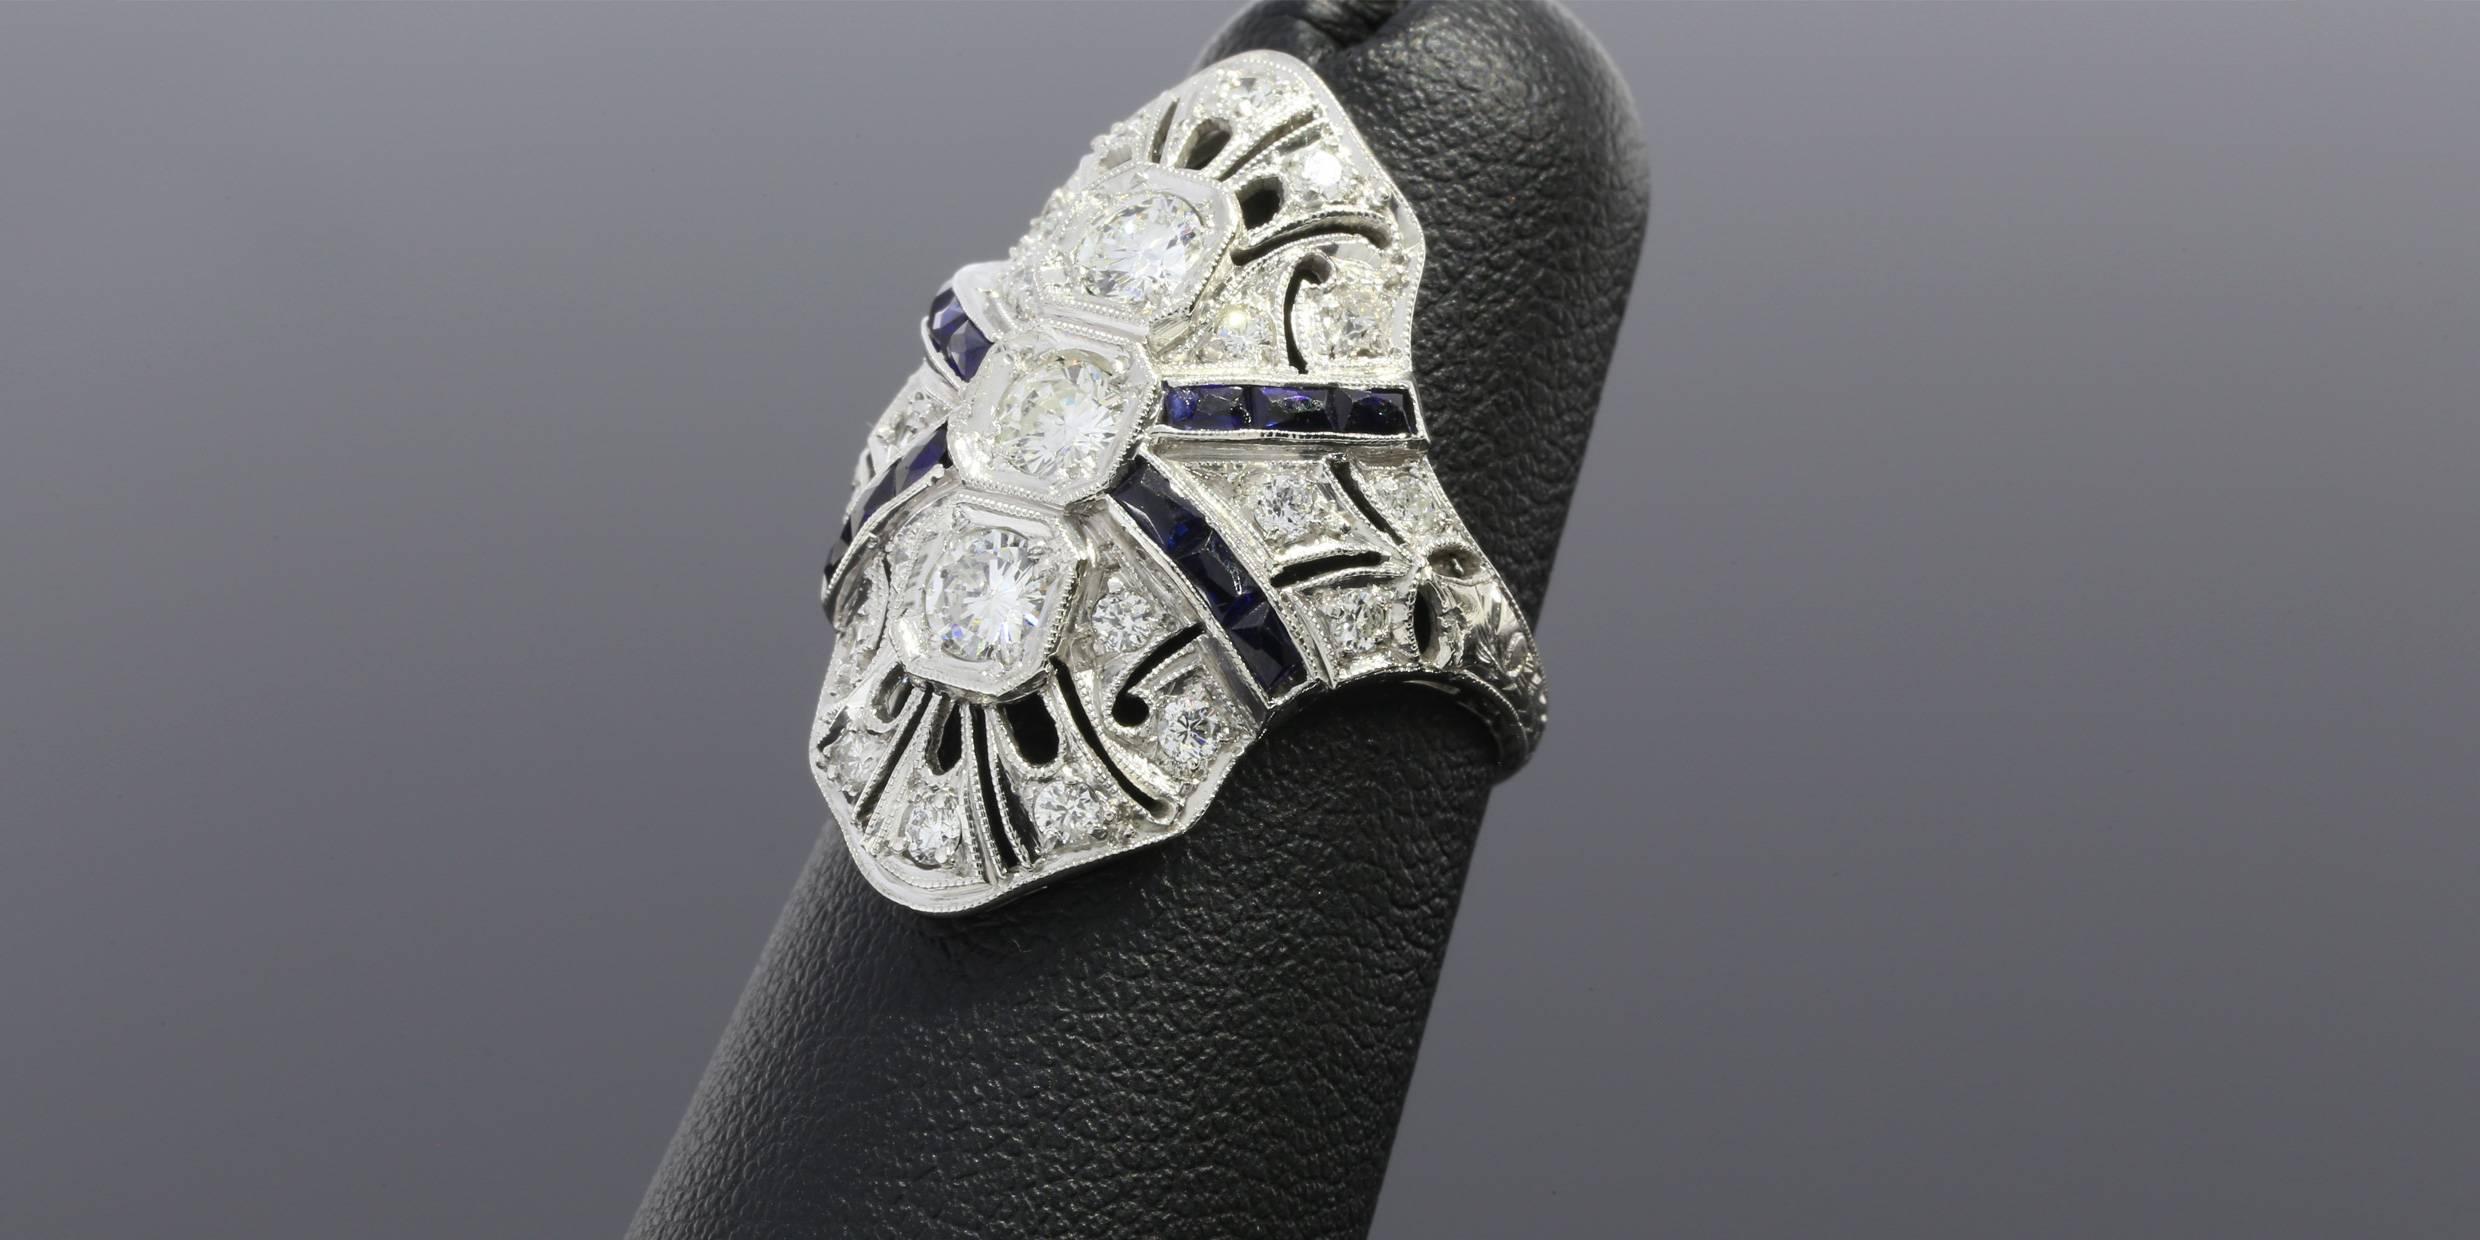 This gorgeous diamond ring features shimmering round brilliant cut diamonds & rectangular faceted blue sapphires with a combined total weight of approximately 1.5 carats. The diamonds are GH/SI in quality & bead set in an art deco style,